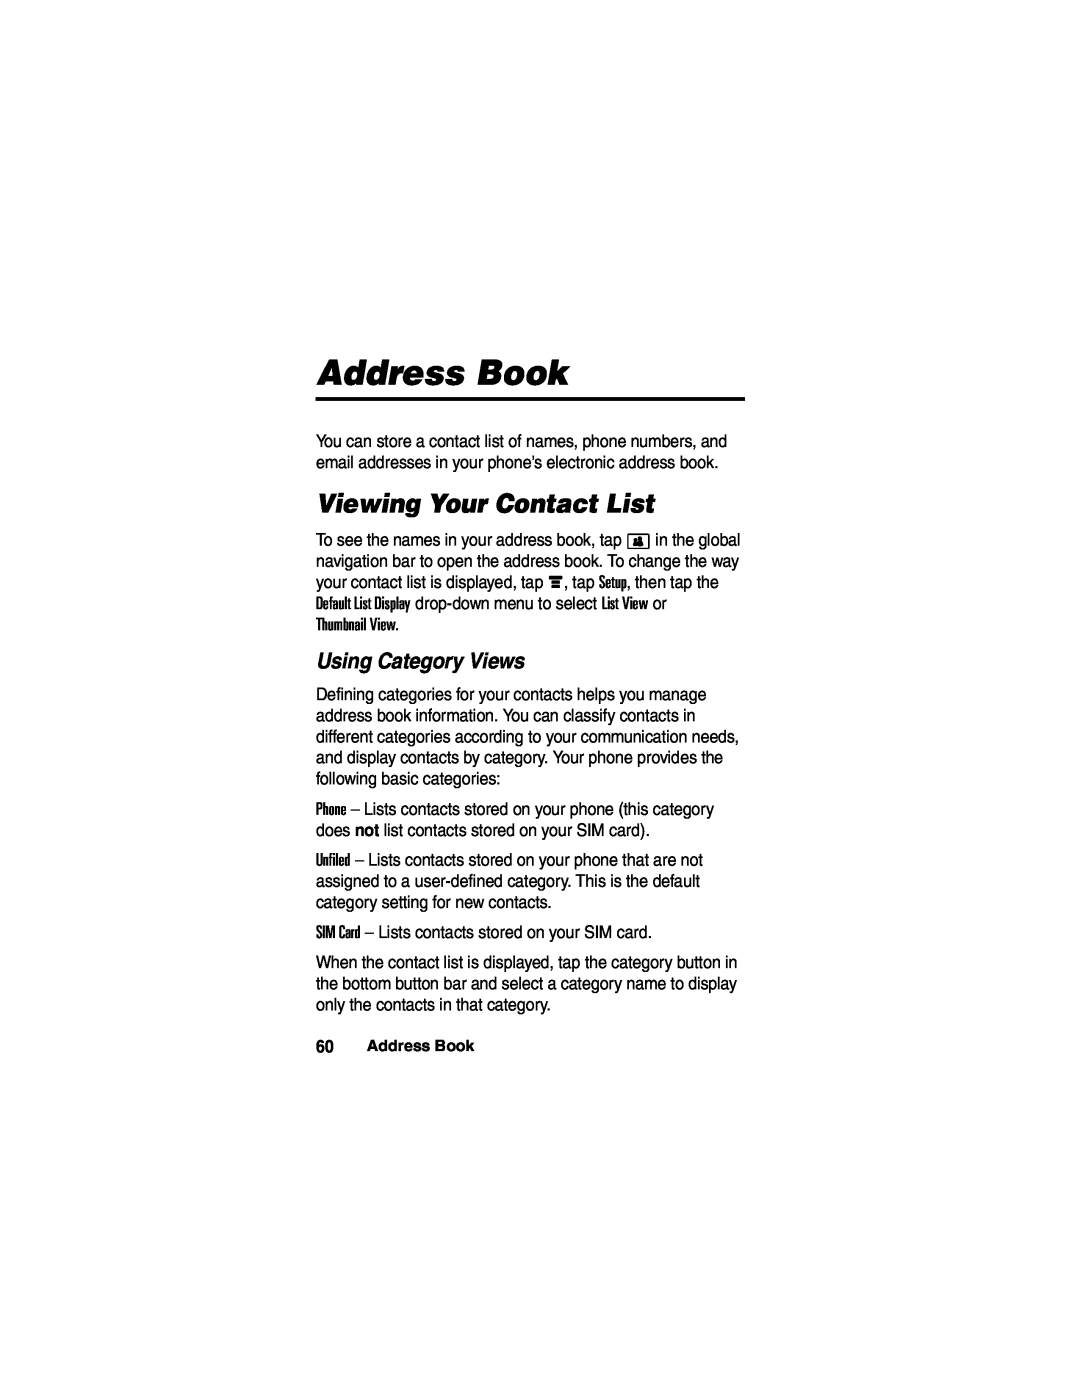 Motorola A780 manual Address Book, Viewing Your Contact List, Using Category Views 